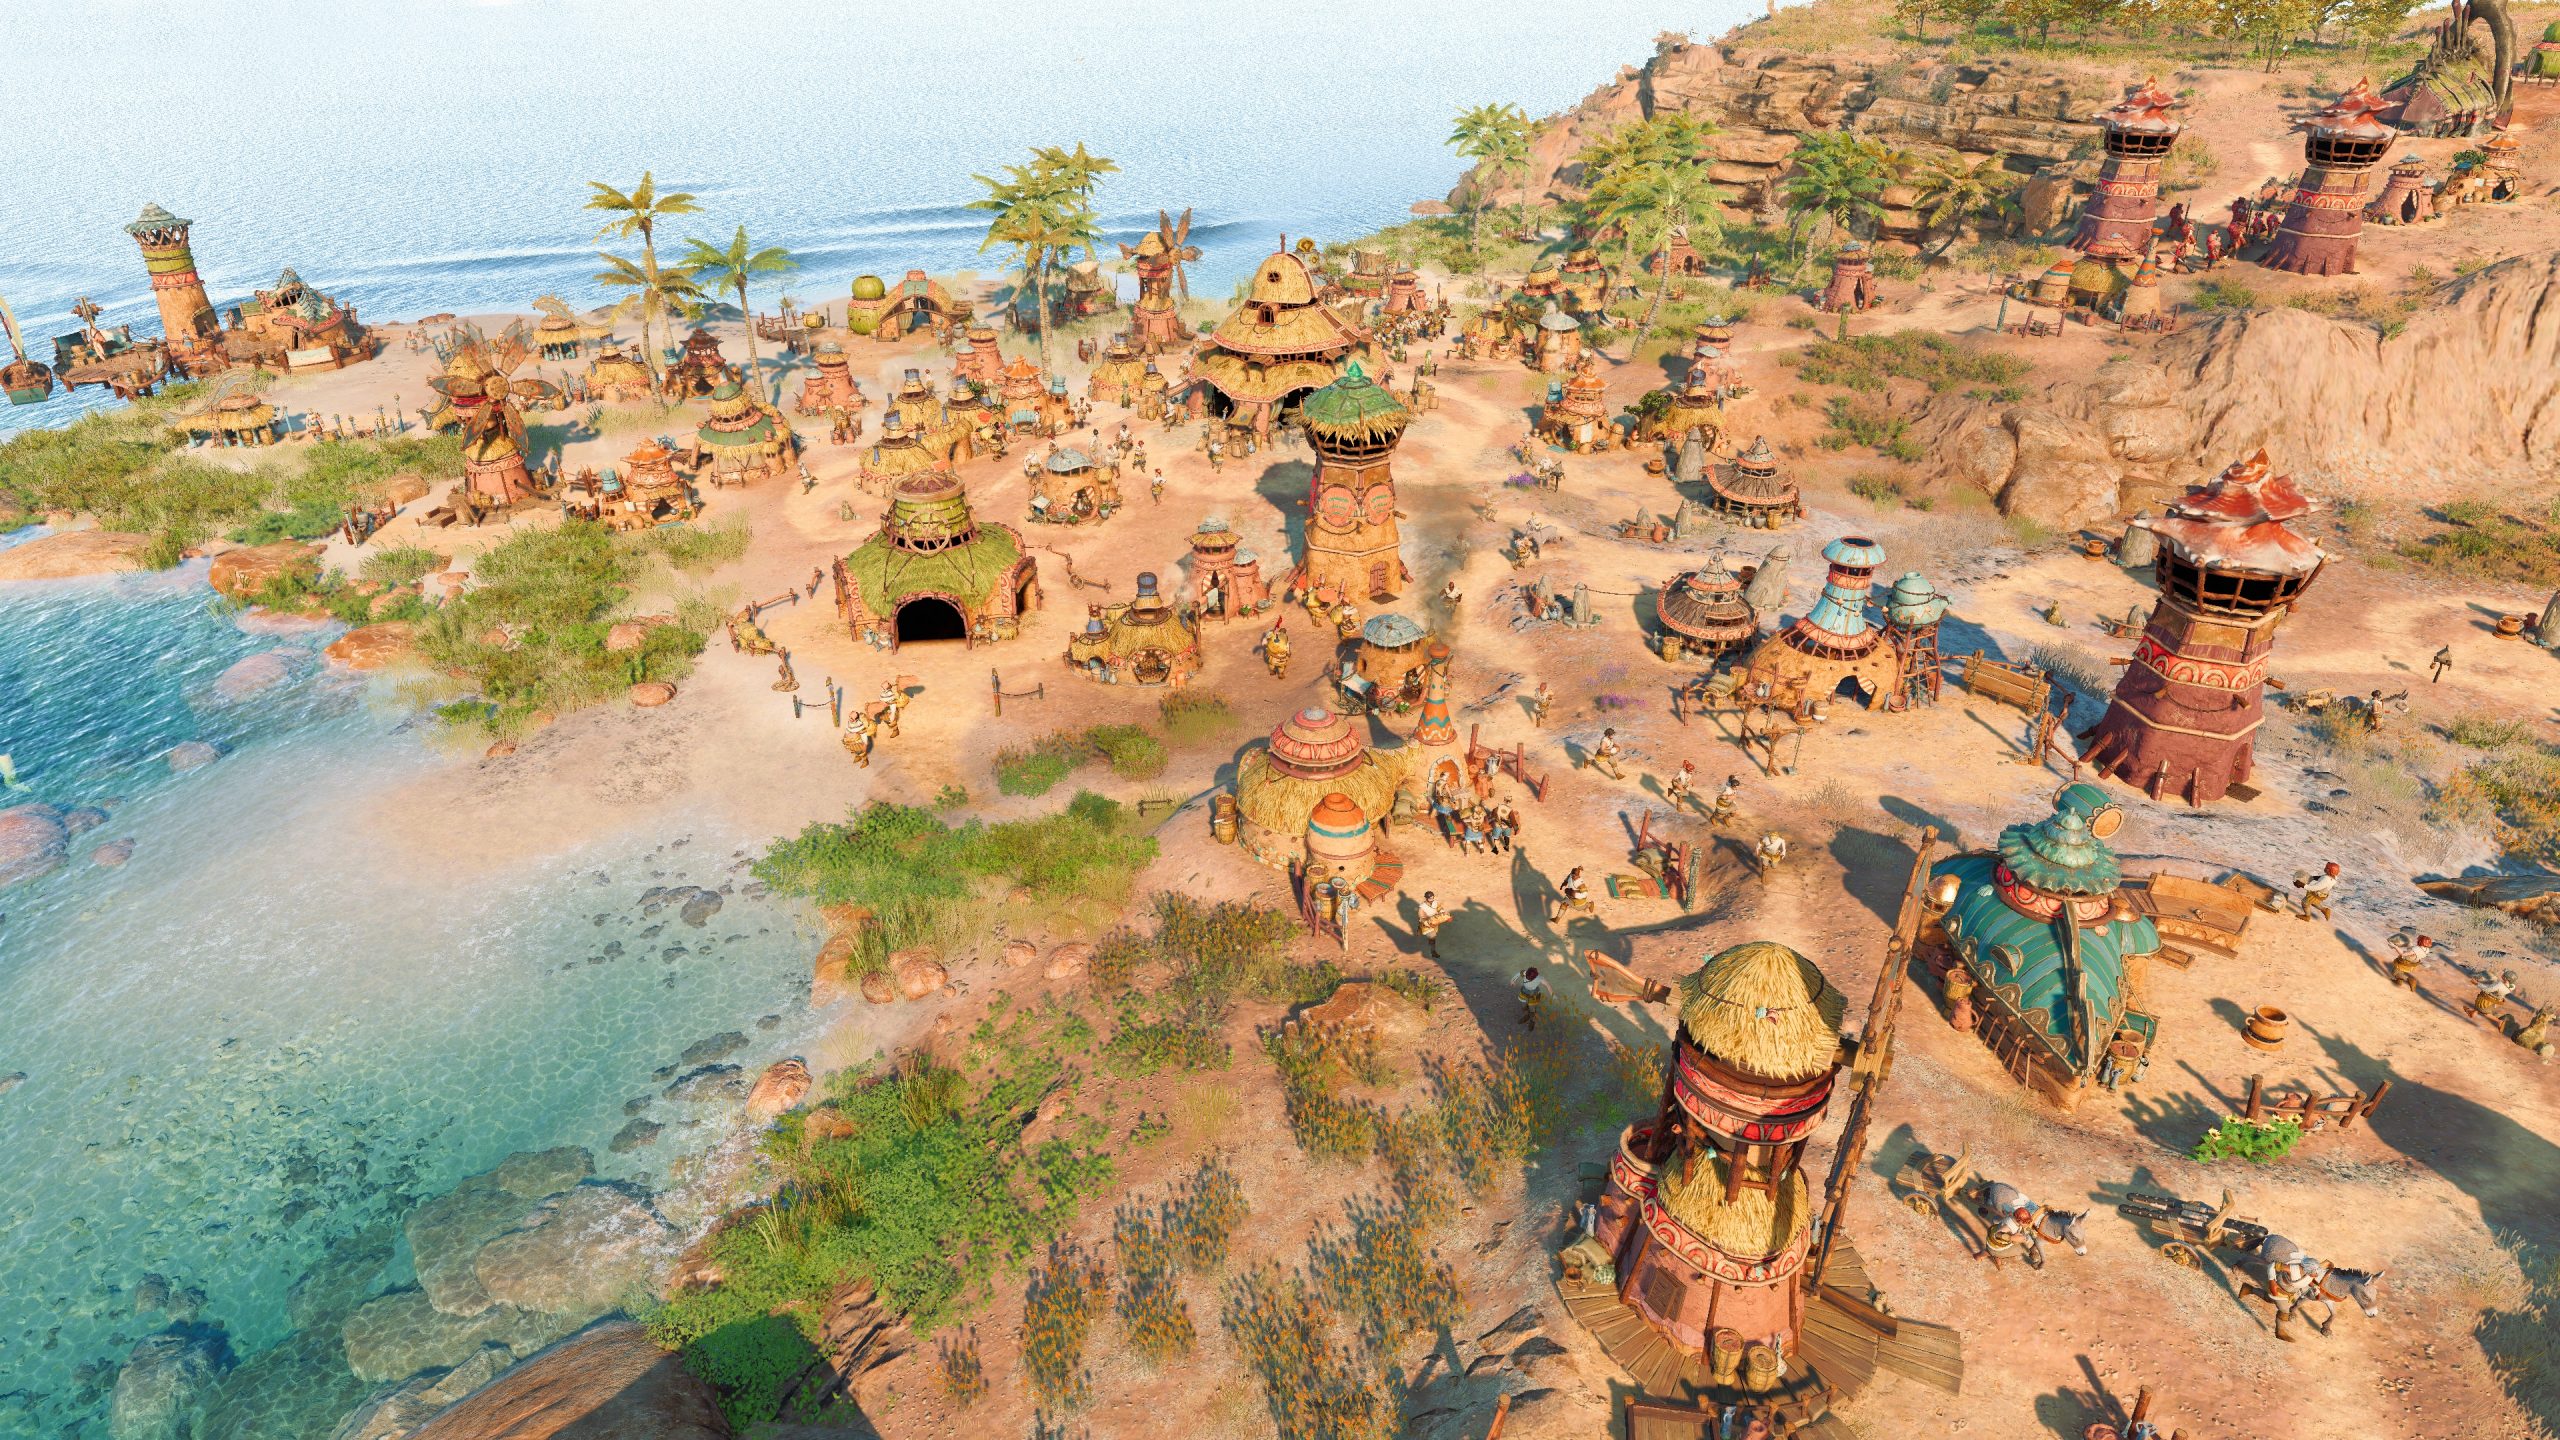 A screenshot from The Settlers: New Allies. This shows a desert-themed town